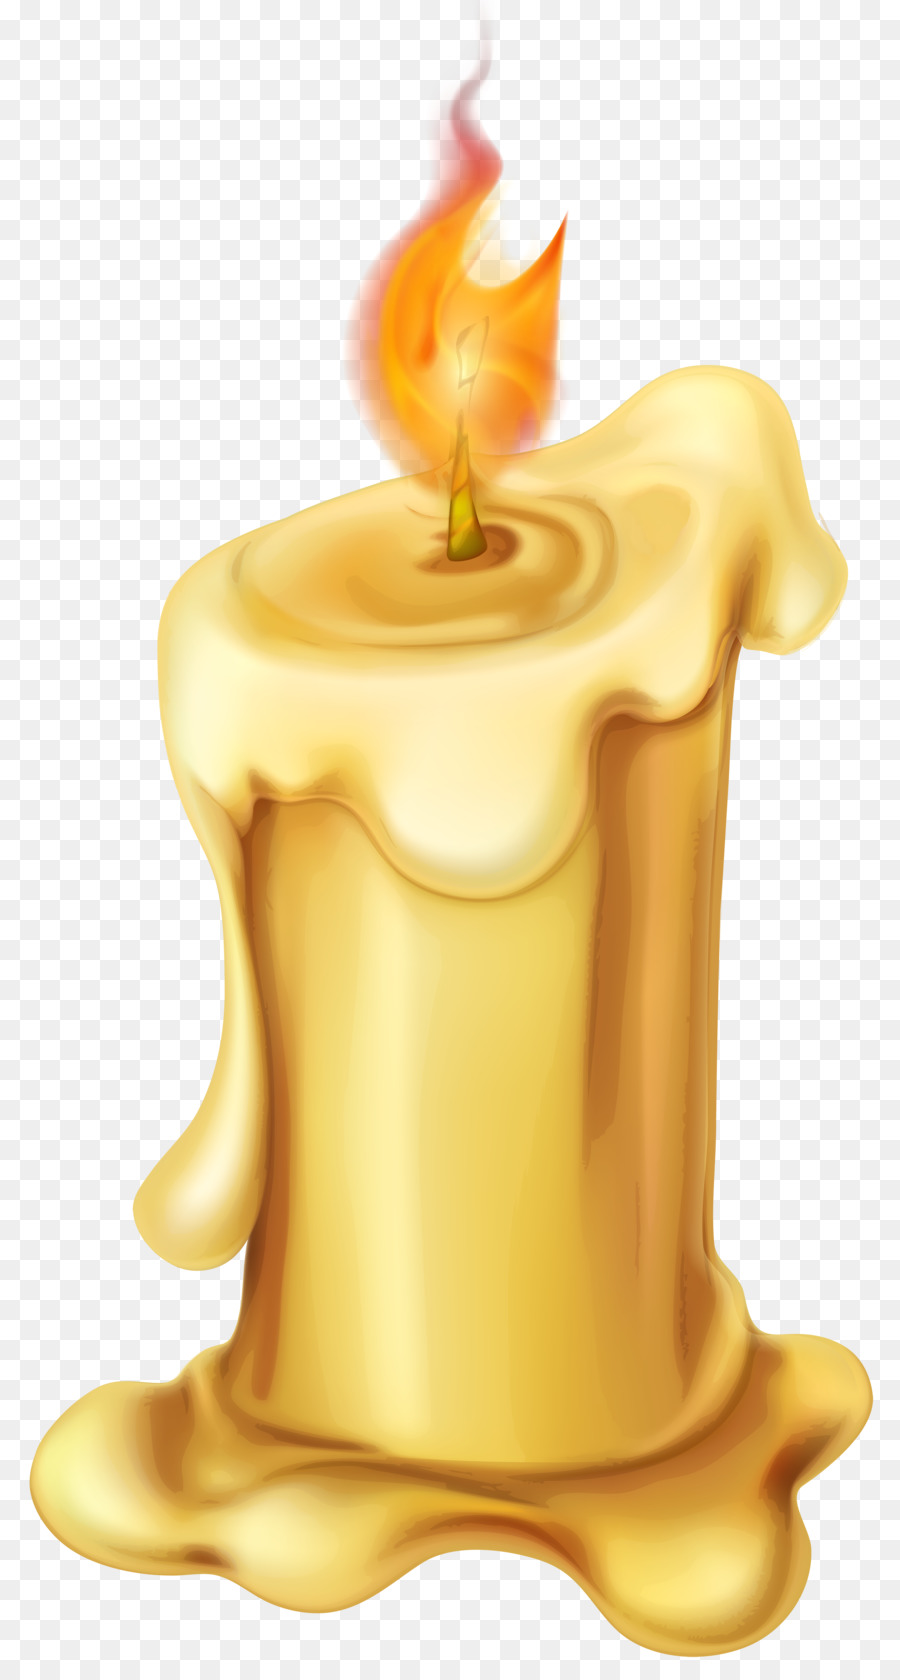 Candle Clip art - candles png download - 3233*6000 - Free Transparent Candle png Download.